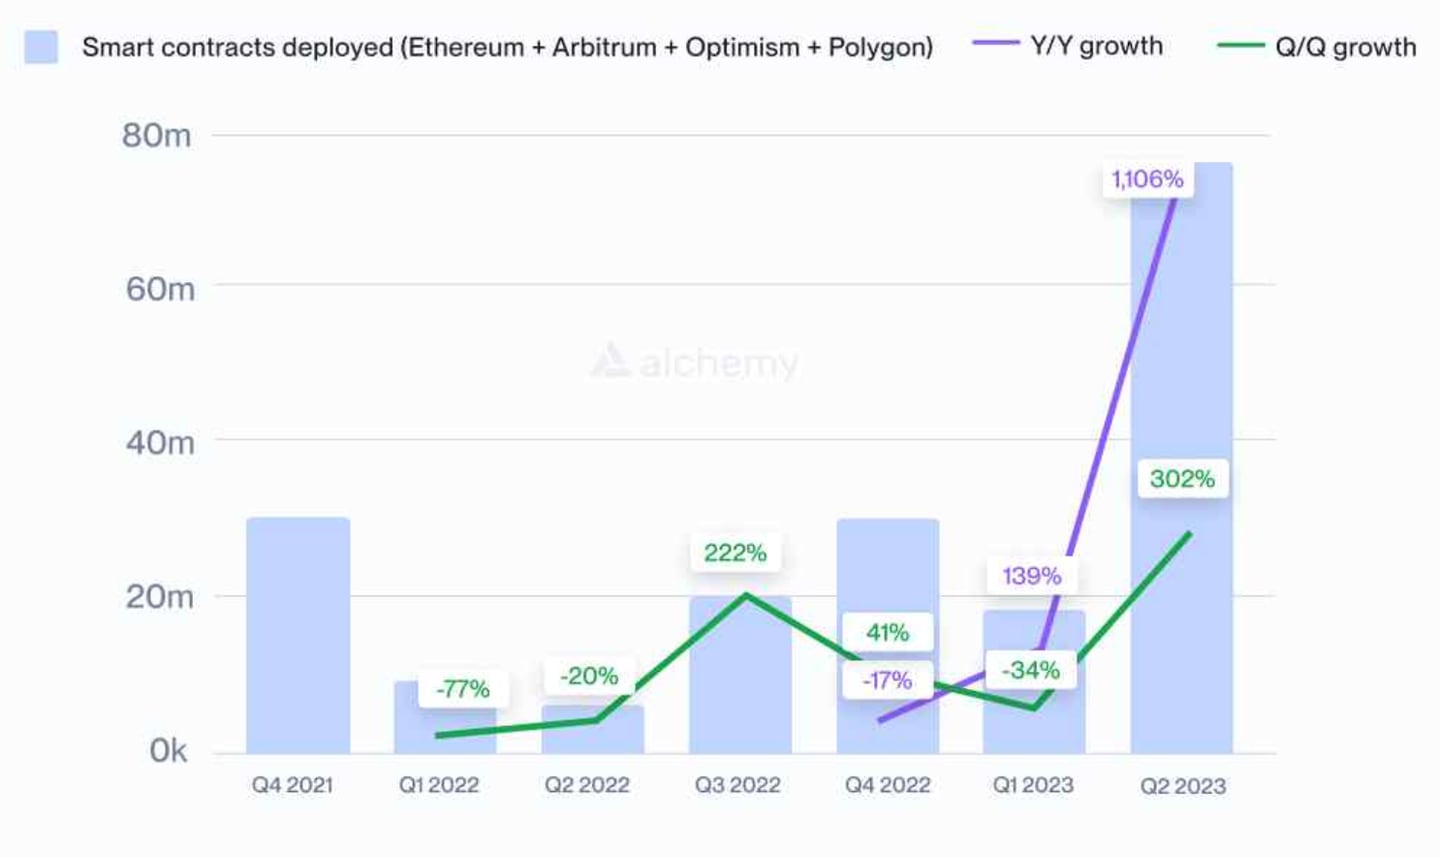 Smart contracts deployed on Ethereum and a trio of related blockchains grew 1,100%, or 12-fold, year-over-year in the second quarter.